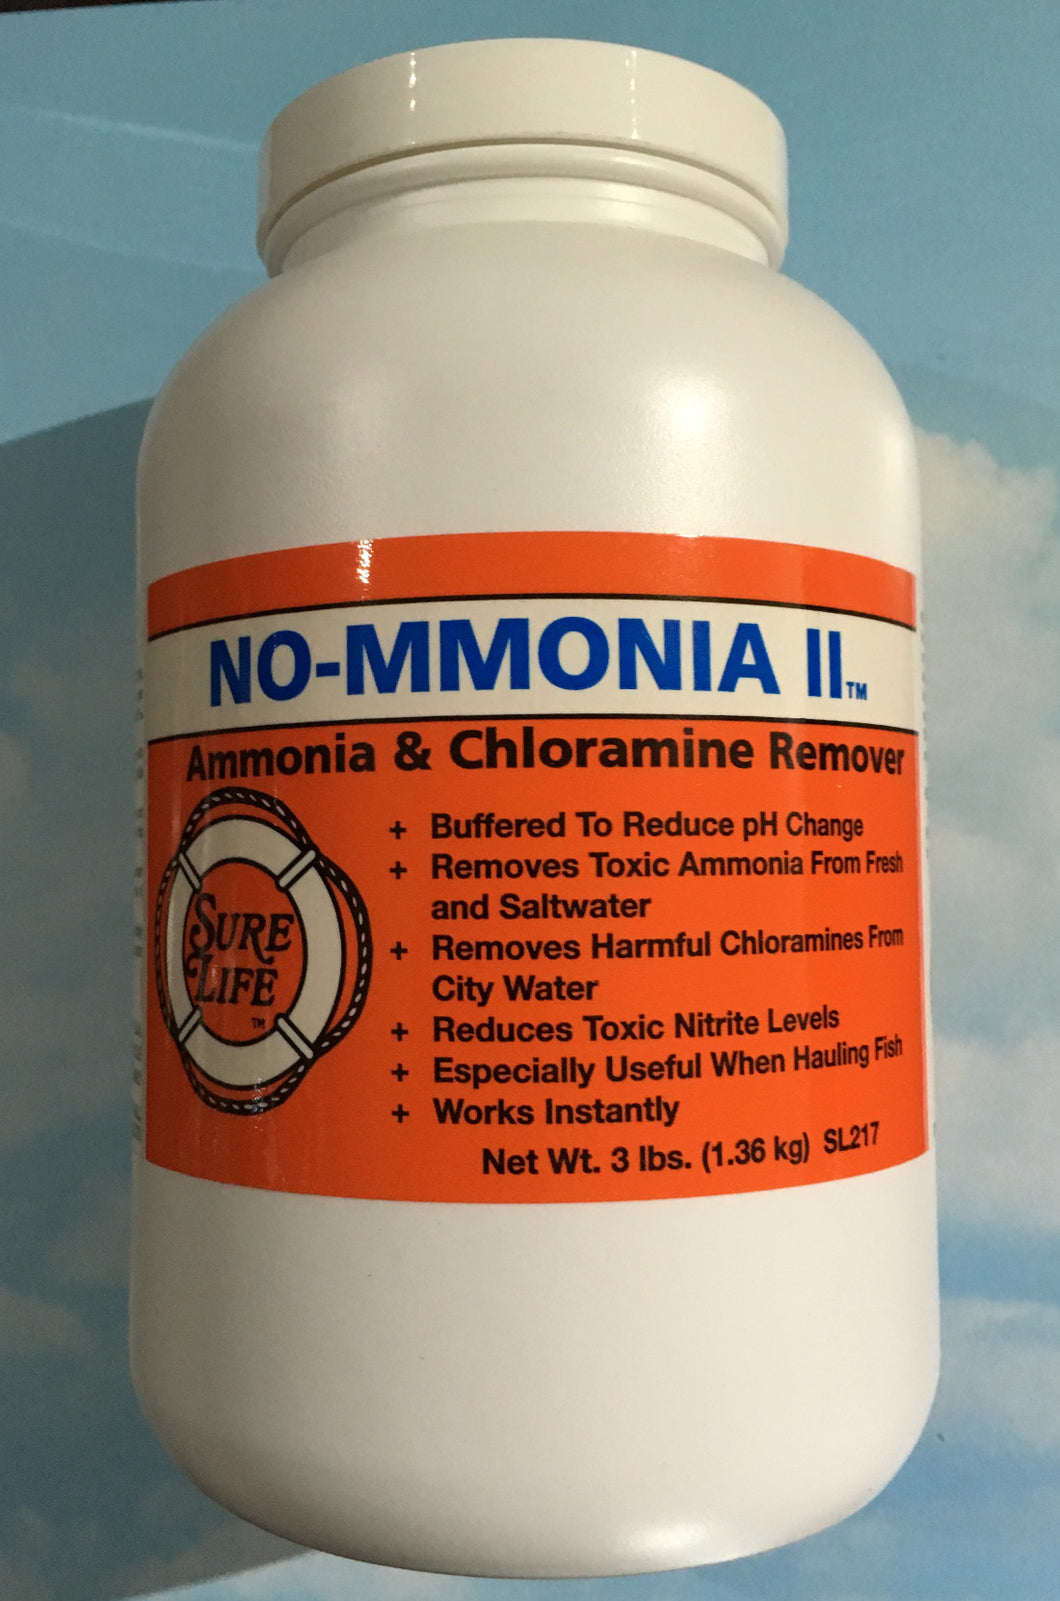 No Mmonia II Ammonia and Chloramine Remover by Sure Life